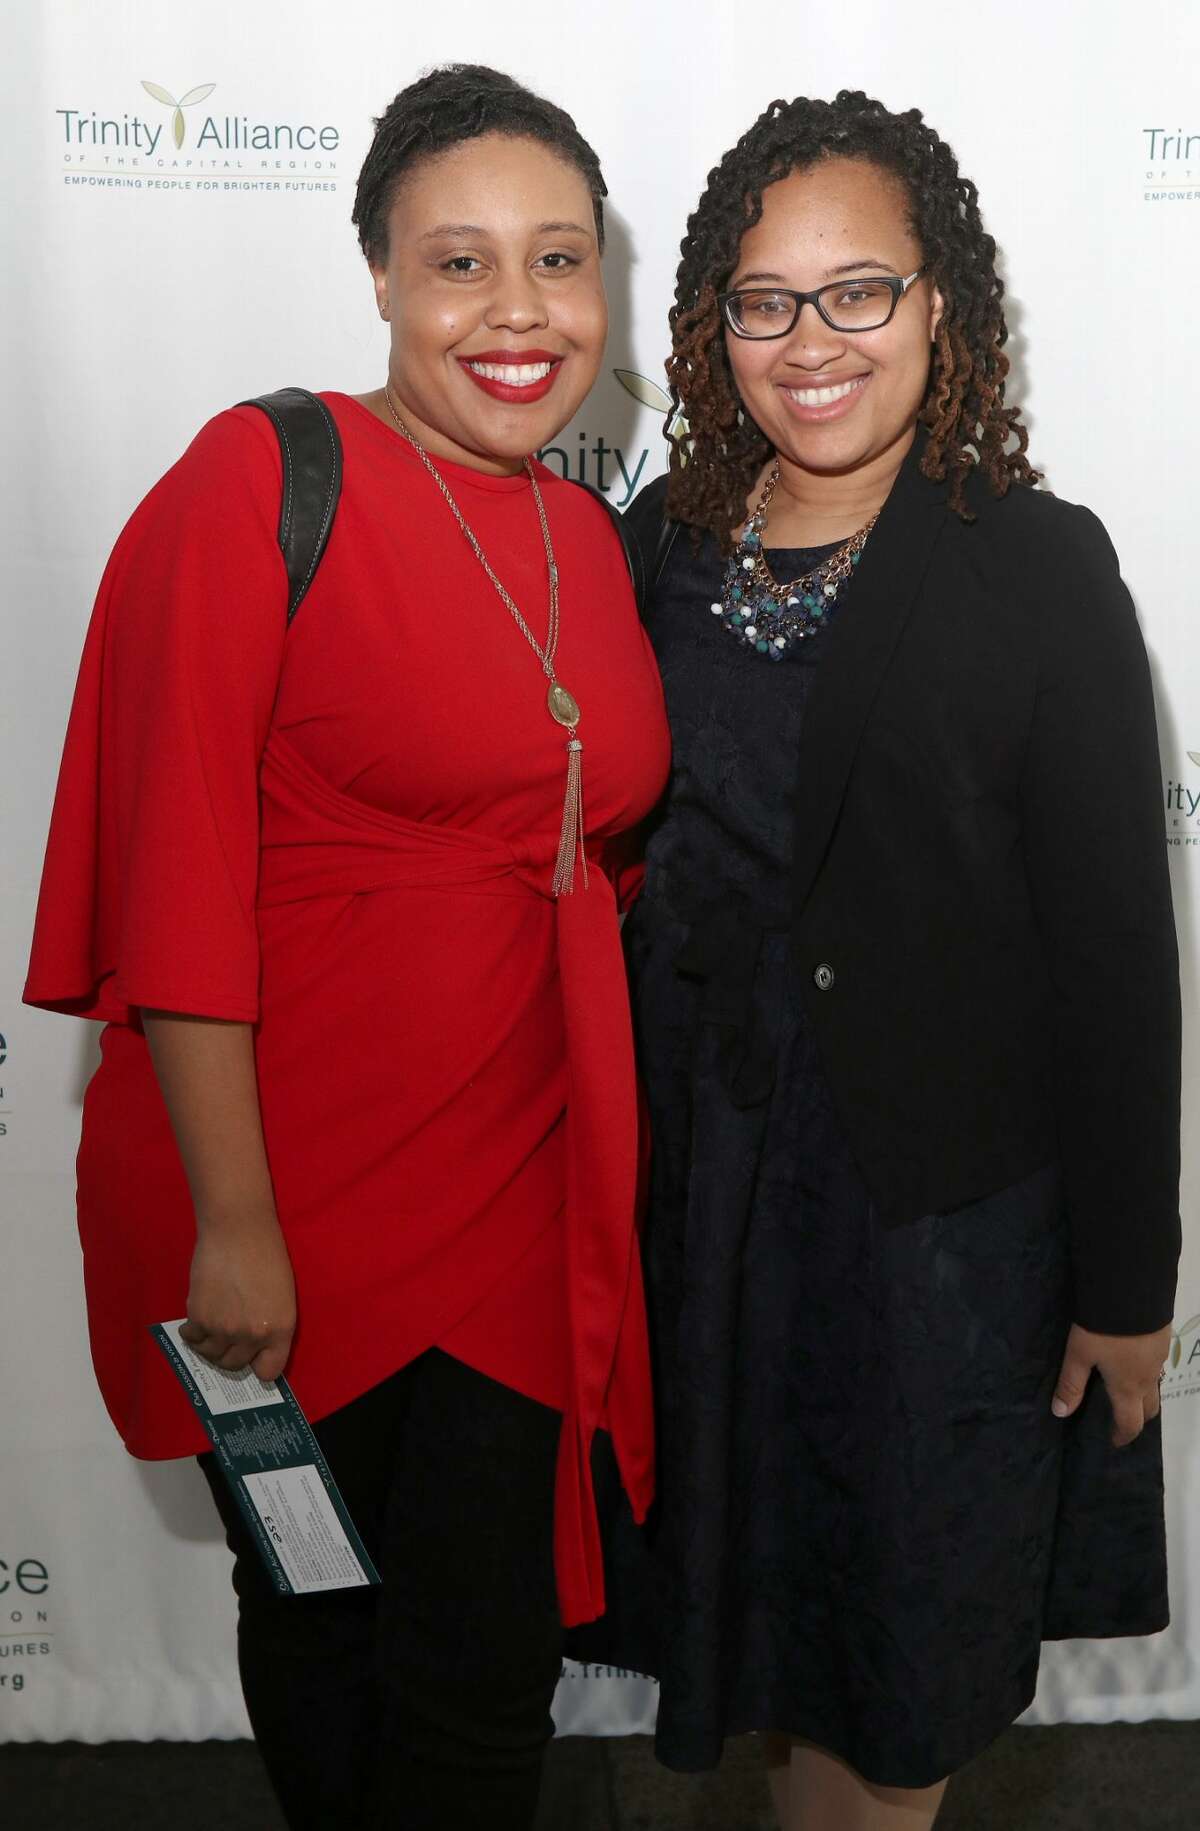 Were You Seen at the “Time, Tradition, Trinity” Annual Gala Celebration presented by Trinity Alliance of the Capital Region at the New York State Museum Terrace Gallery on Wednesday, April 17, 2019?